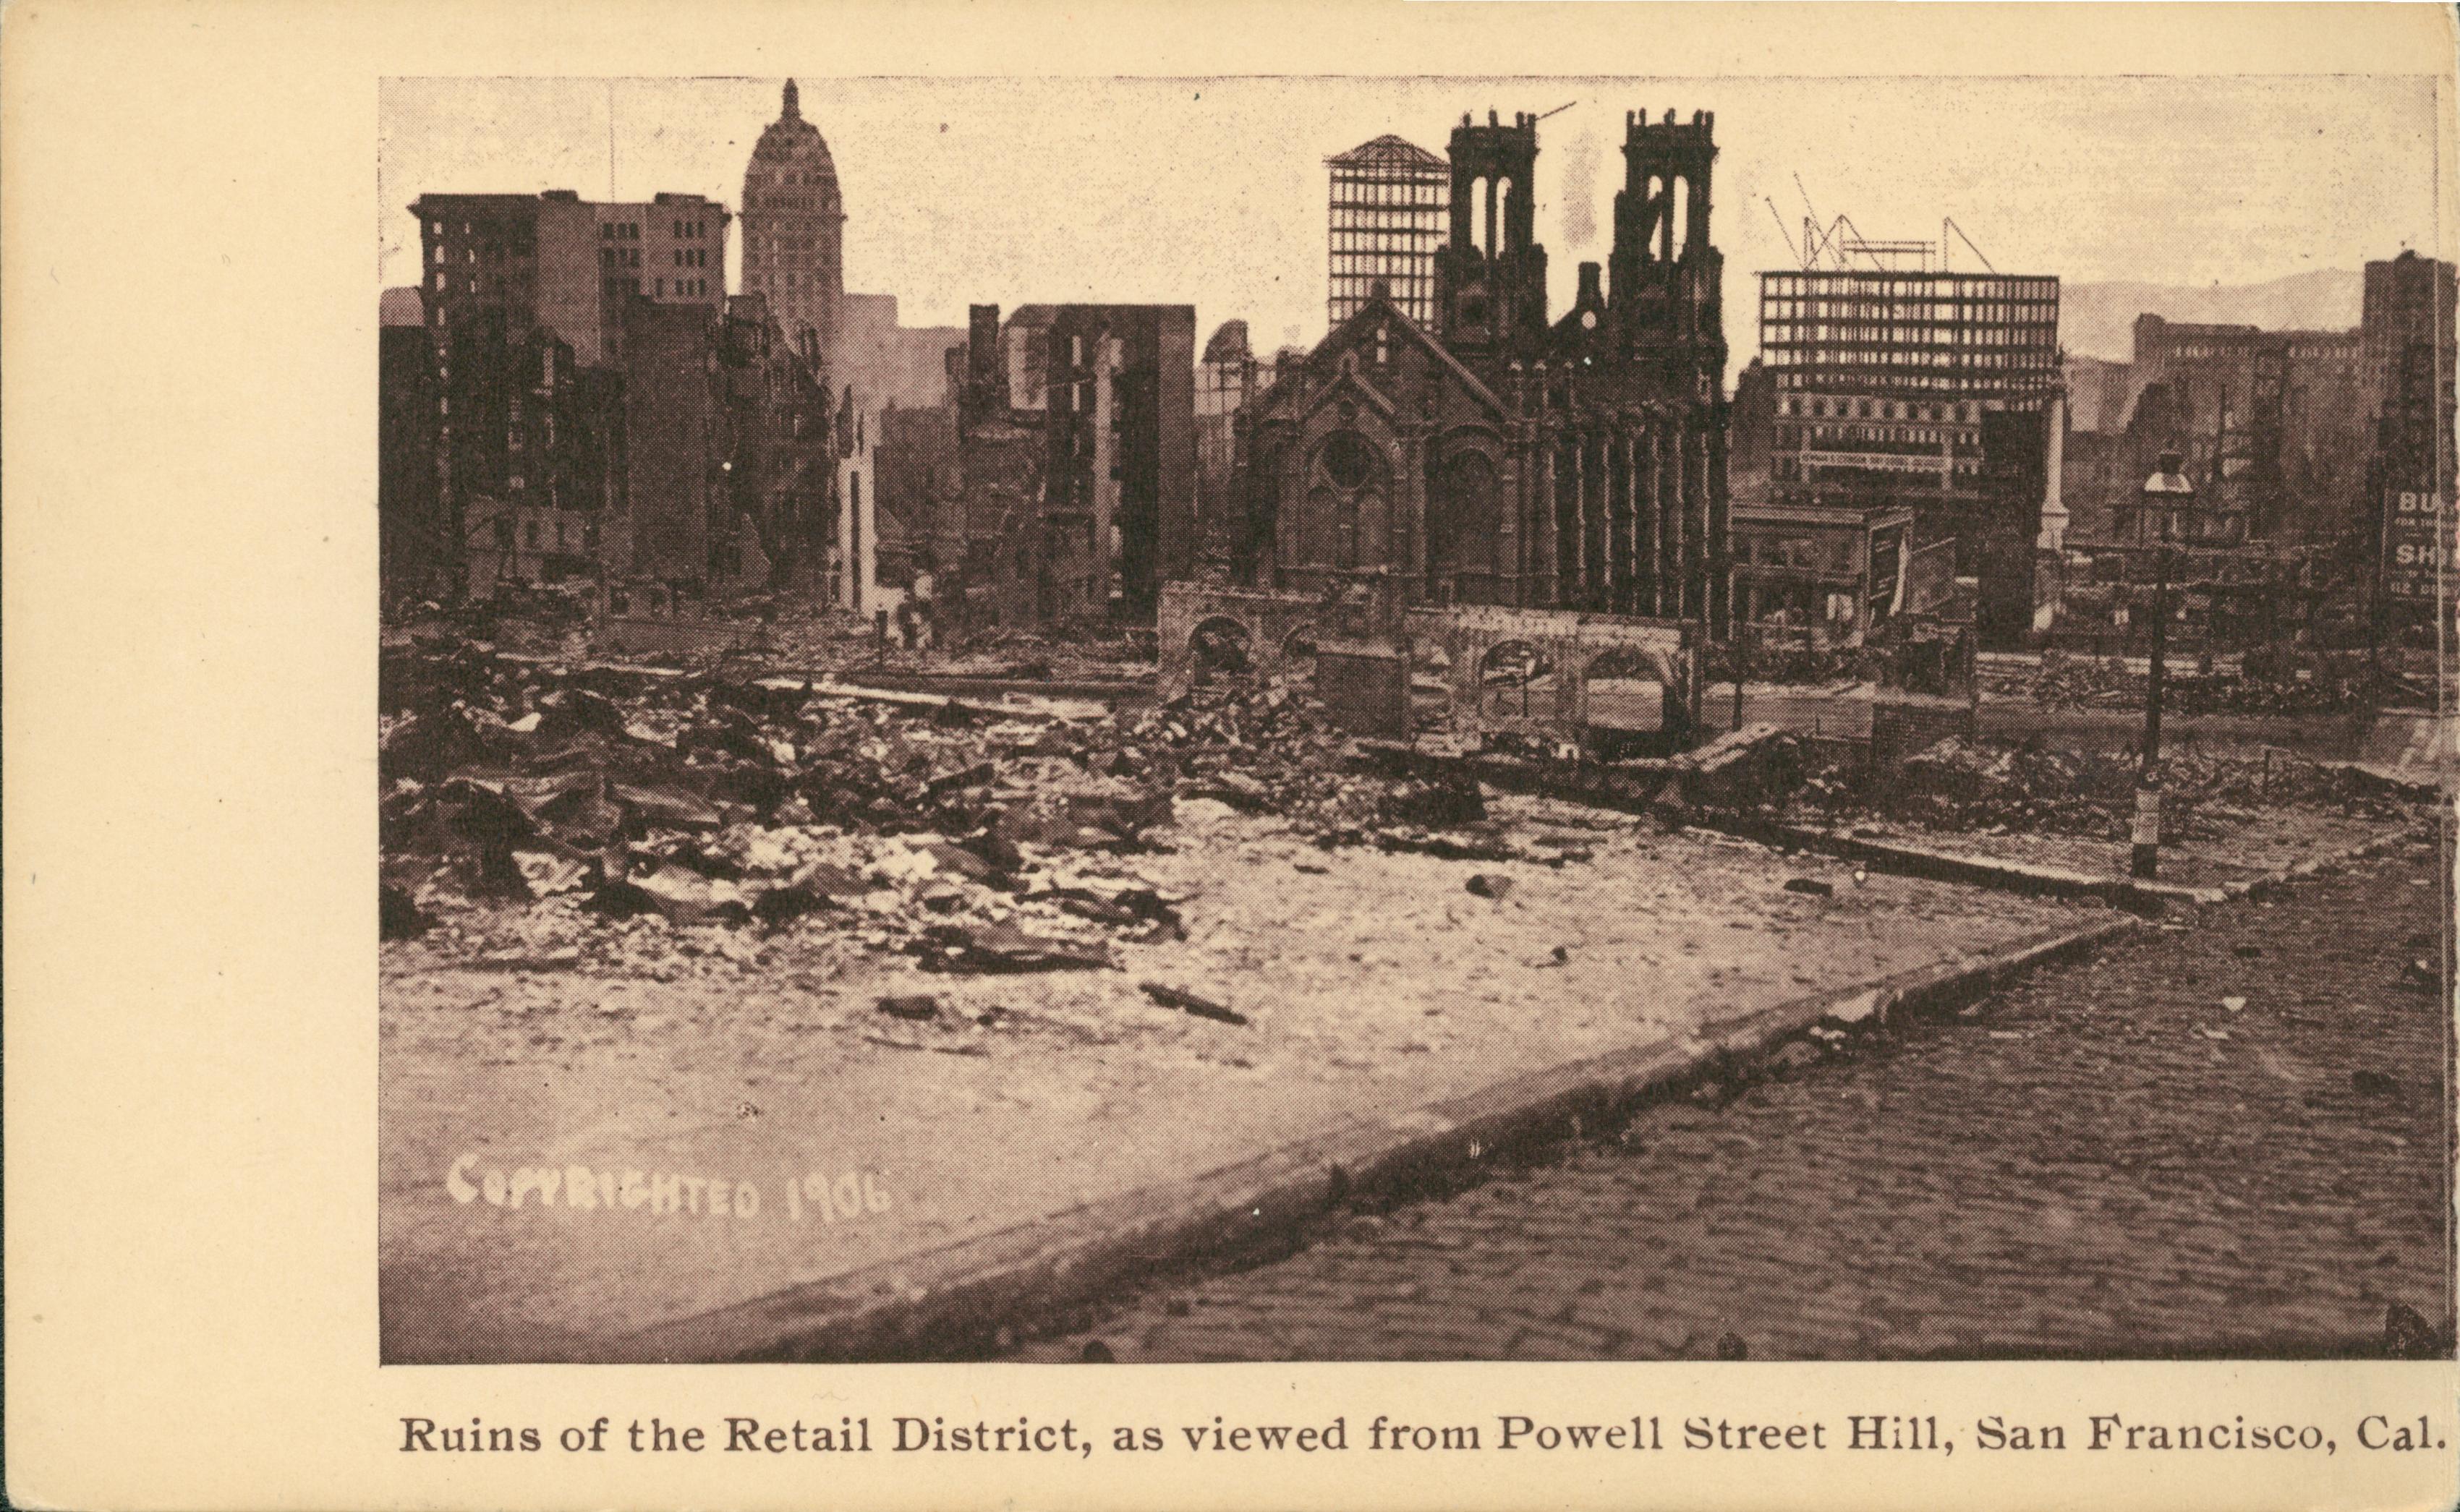 Shows a panoramic view of the destruction in the Retail District, San Francisco, California.